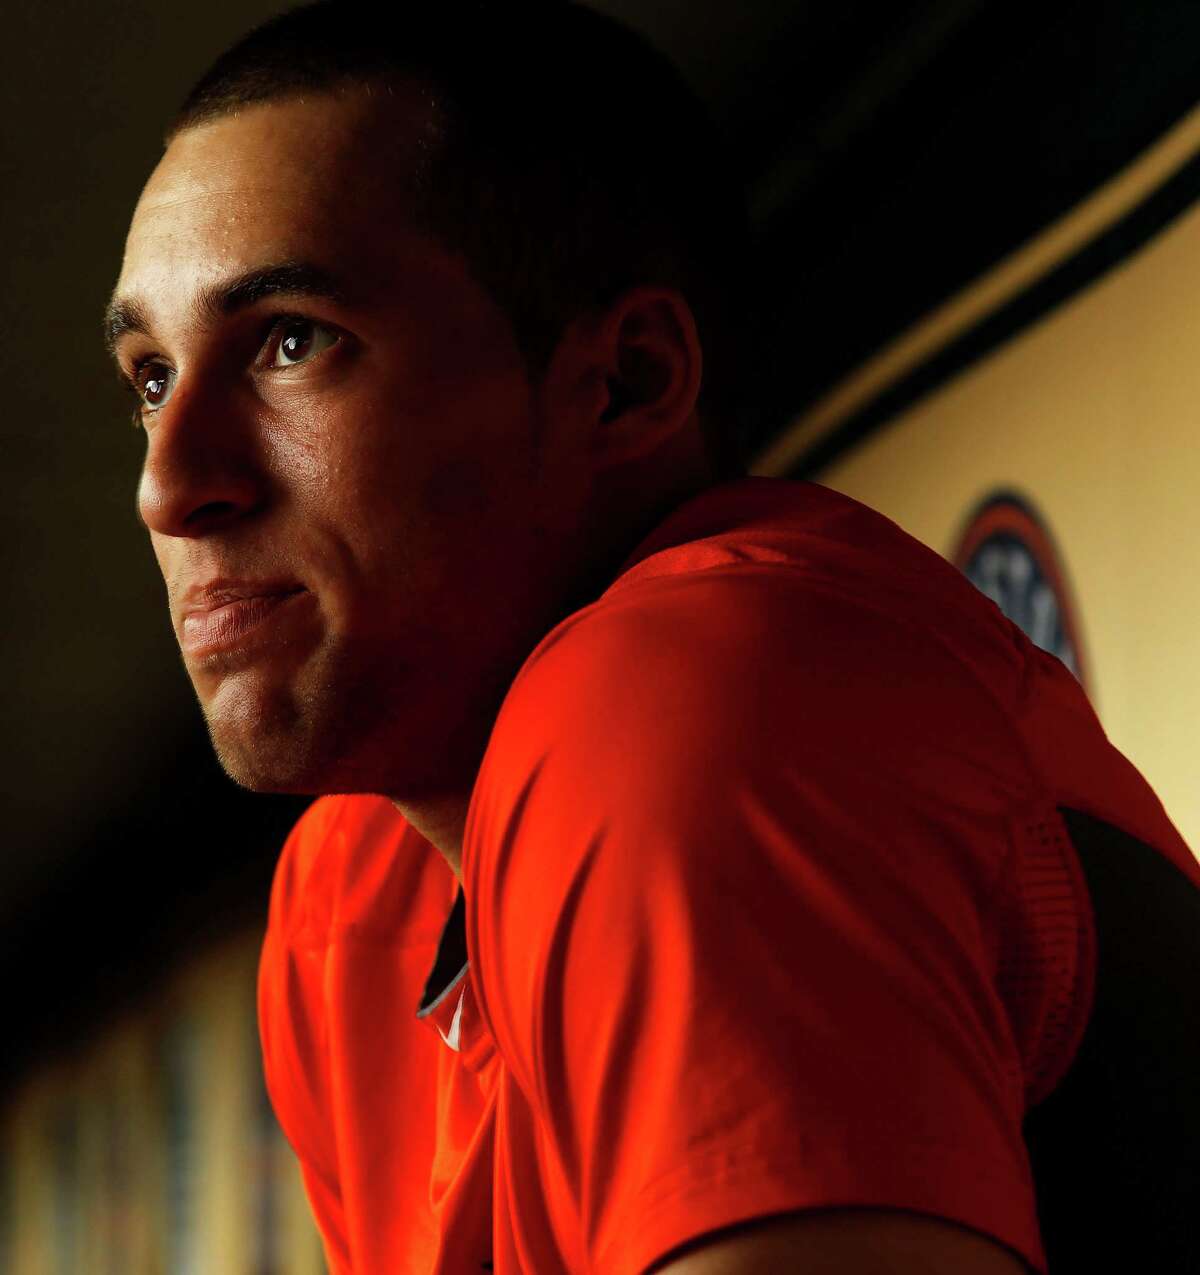 Houston Astros George Springer, who has overcome a childhood stutter, photographed in the Astros dugout, Tuesday, May 13, 2014, in Houston. ( Karen Warren / Houston Chronicle )